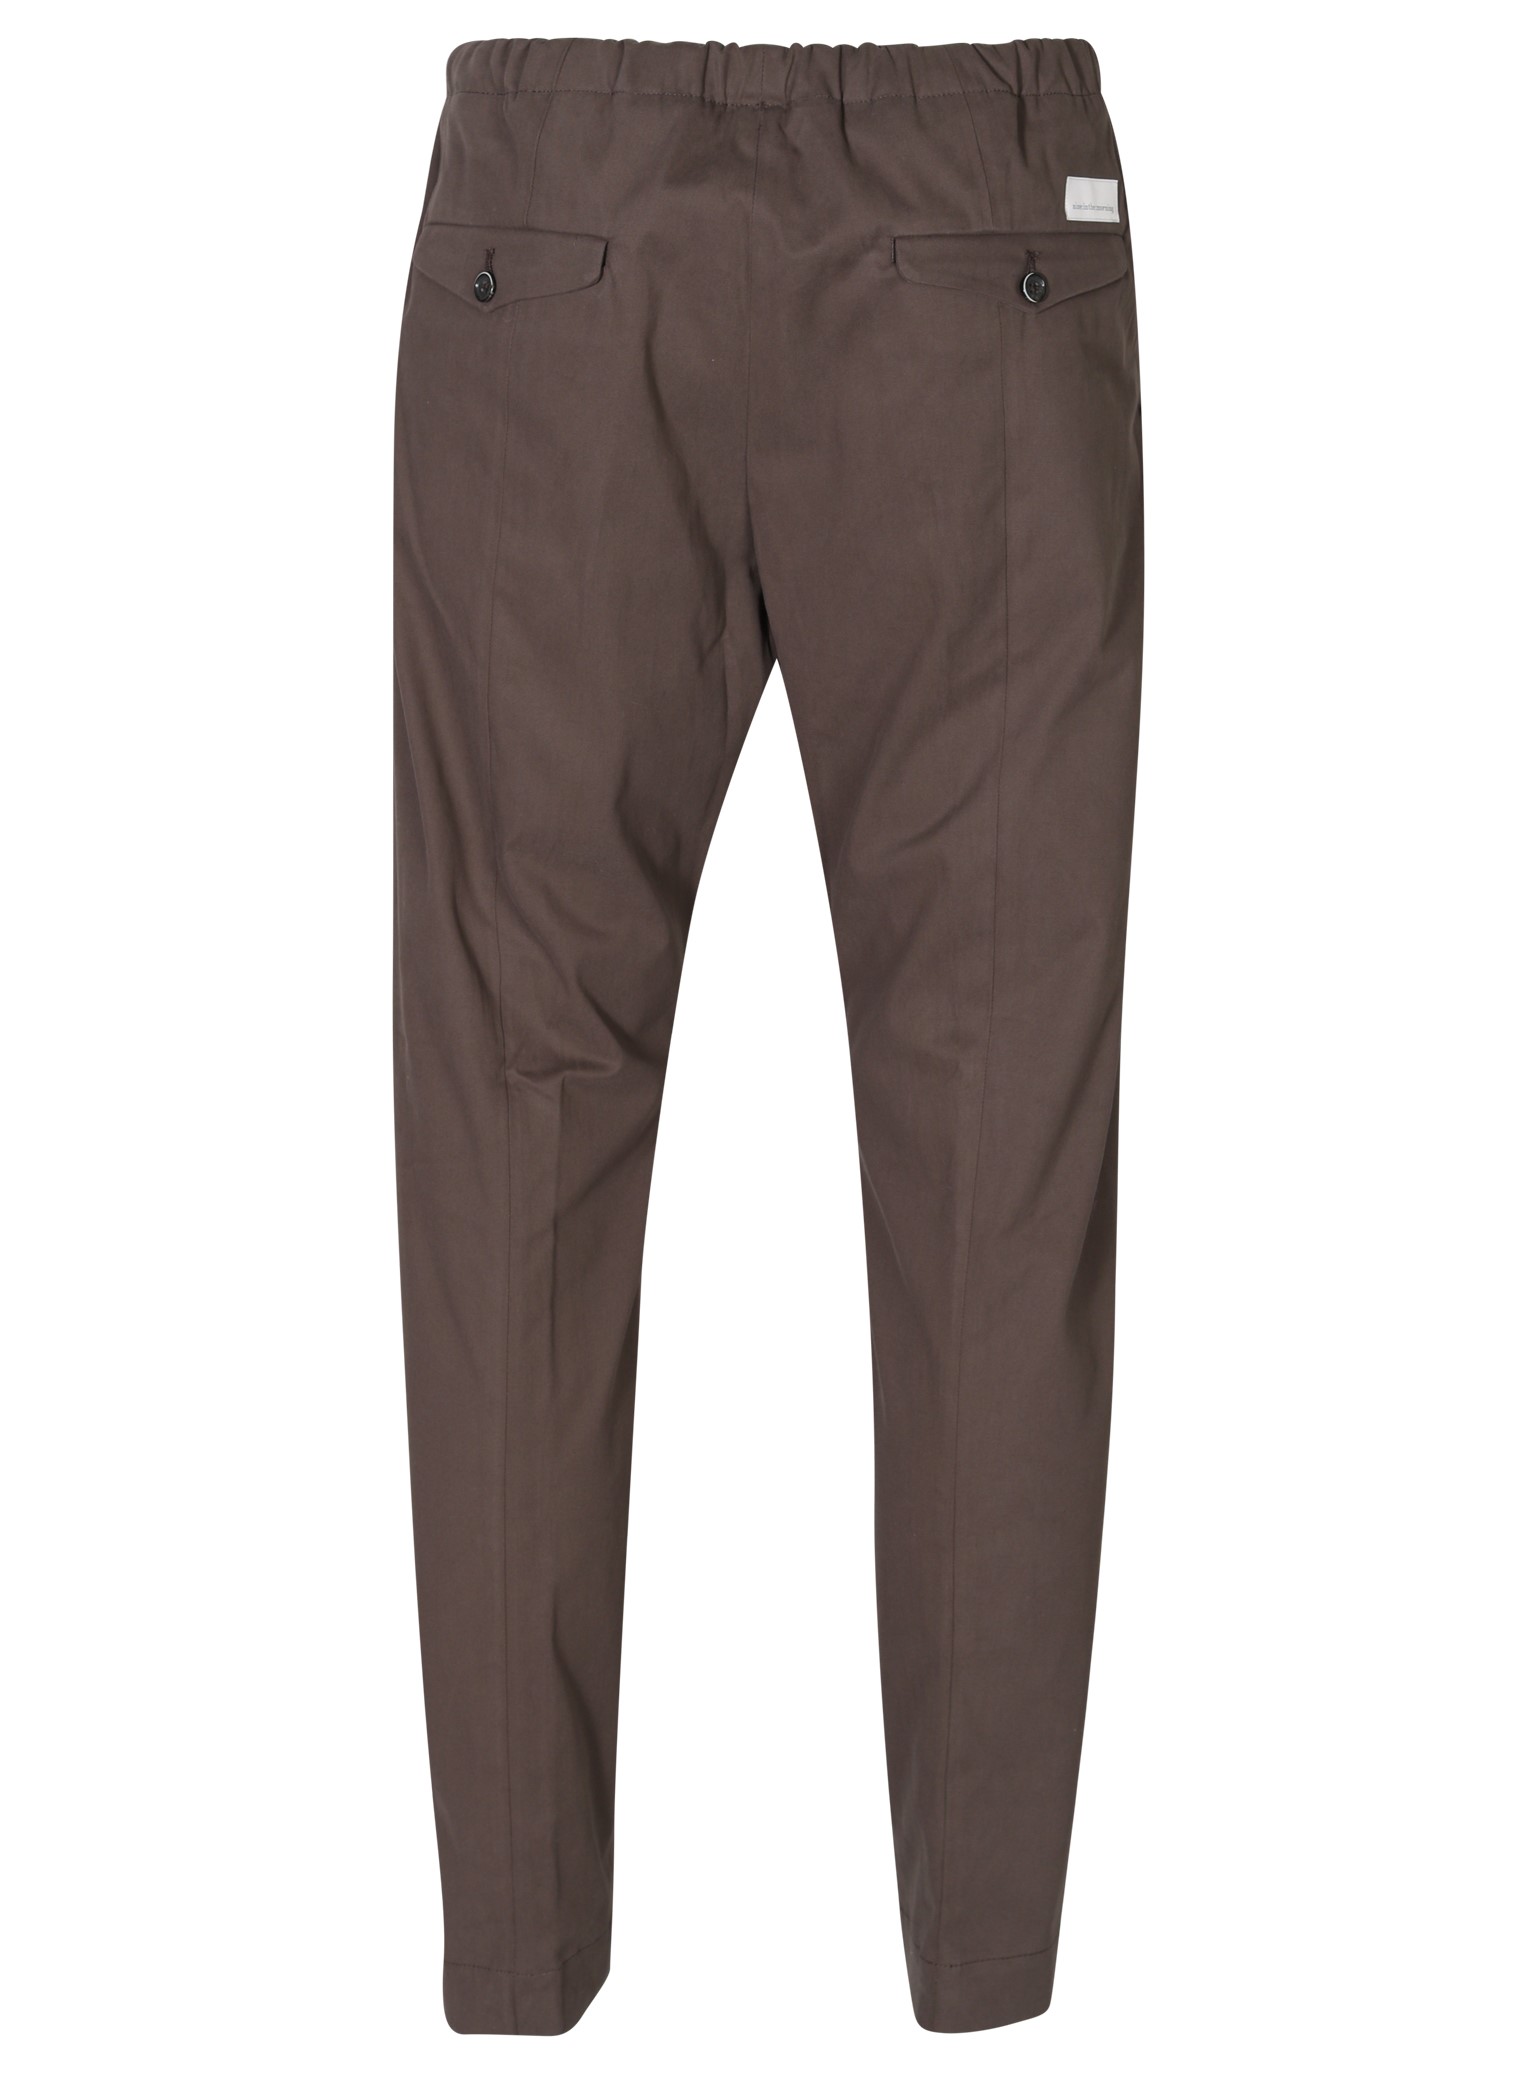 NINE:INTHE:MORNING Mirco Carrot Cotton Stretch Pant in Brown 54